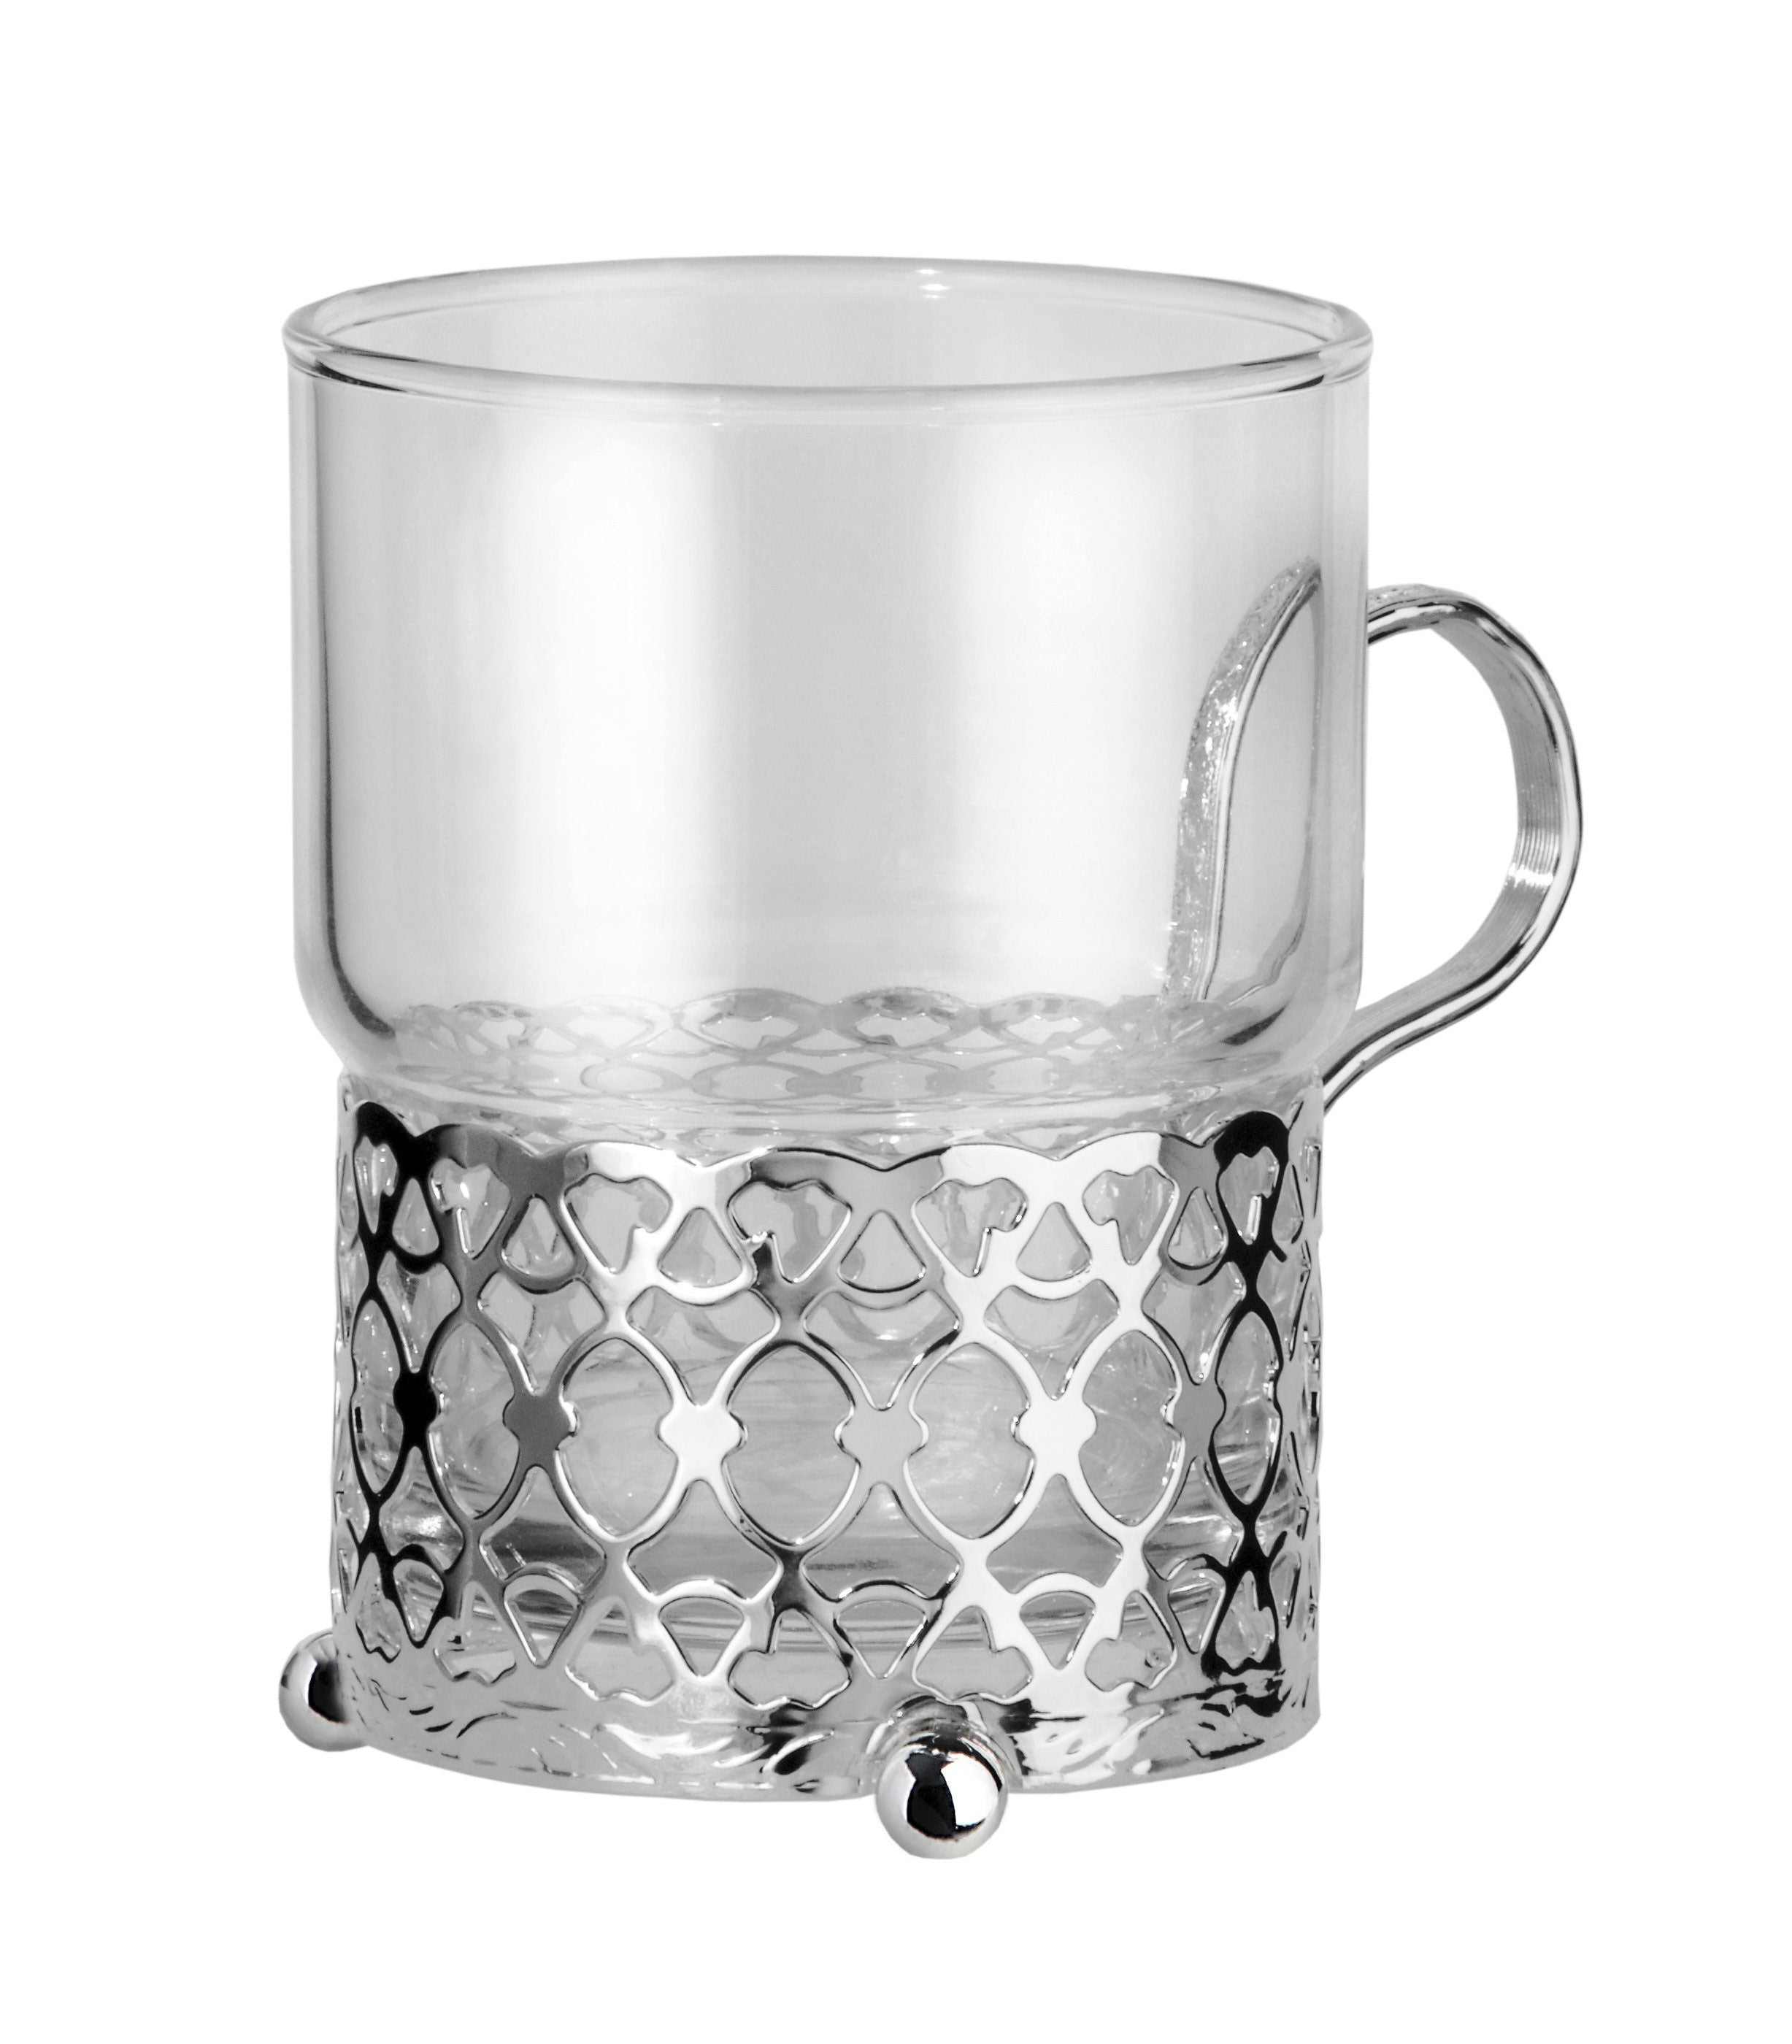 Queen Anne Tea Glass Antique Silver plated Holder - Royal Gift